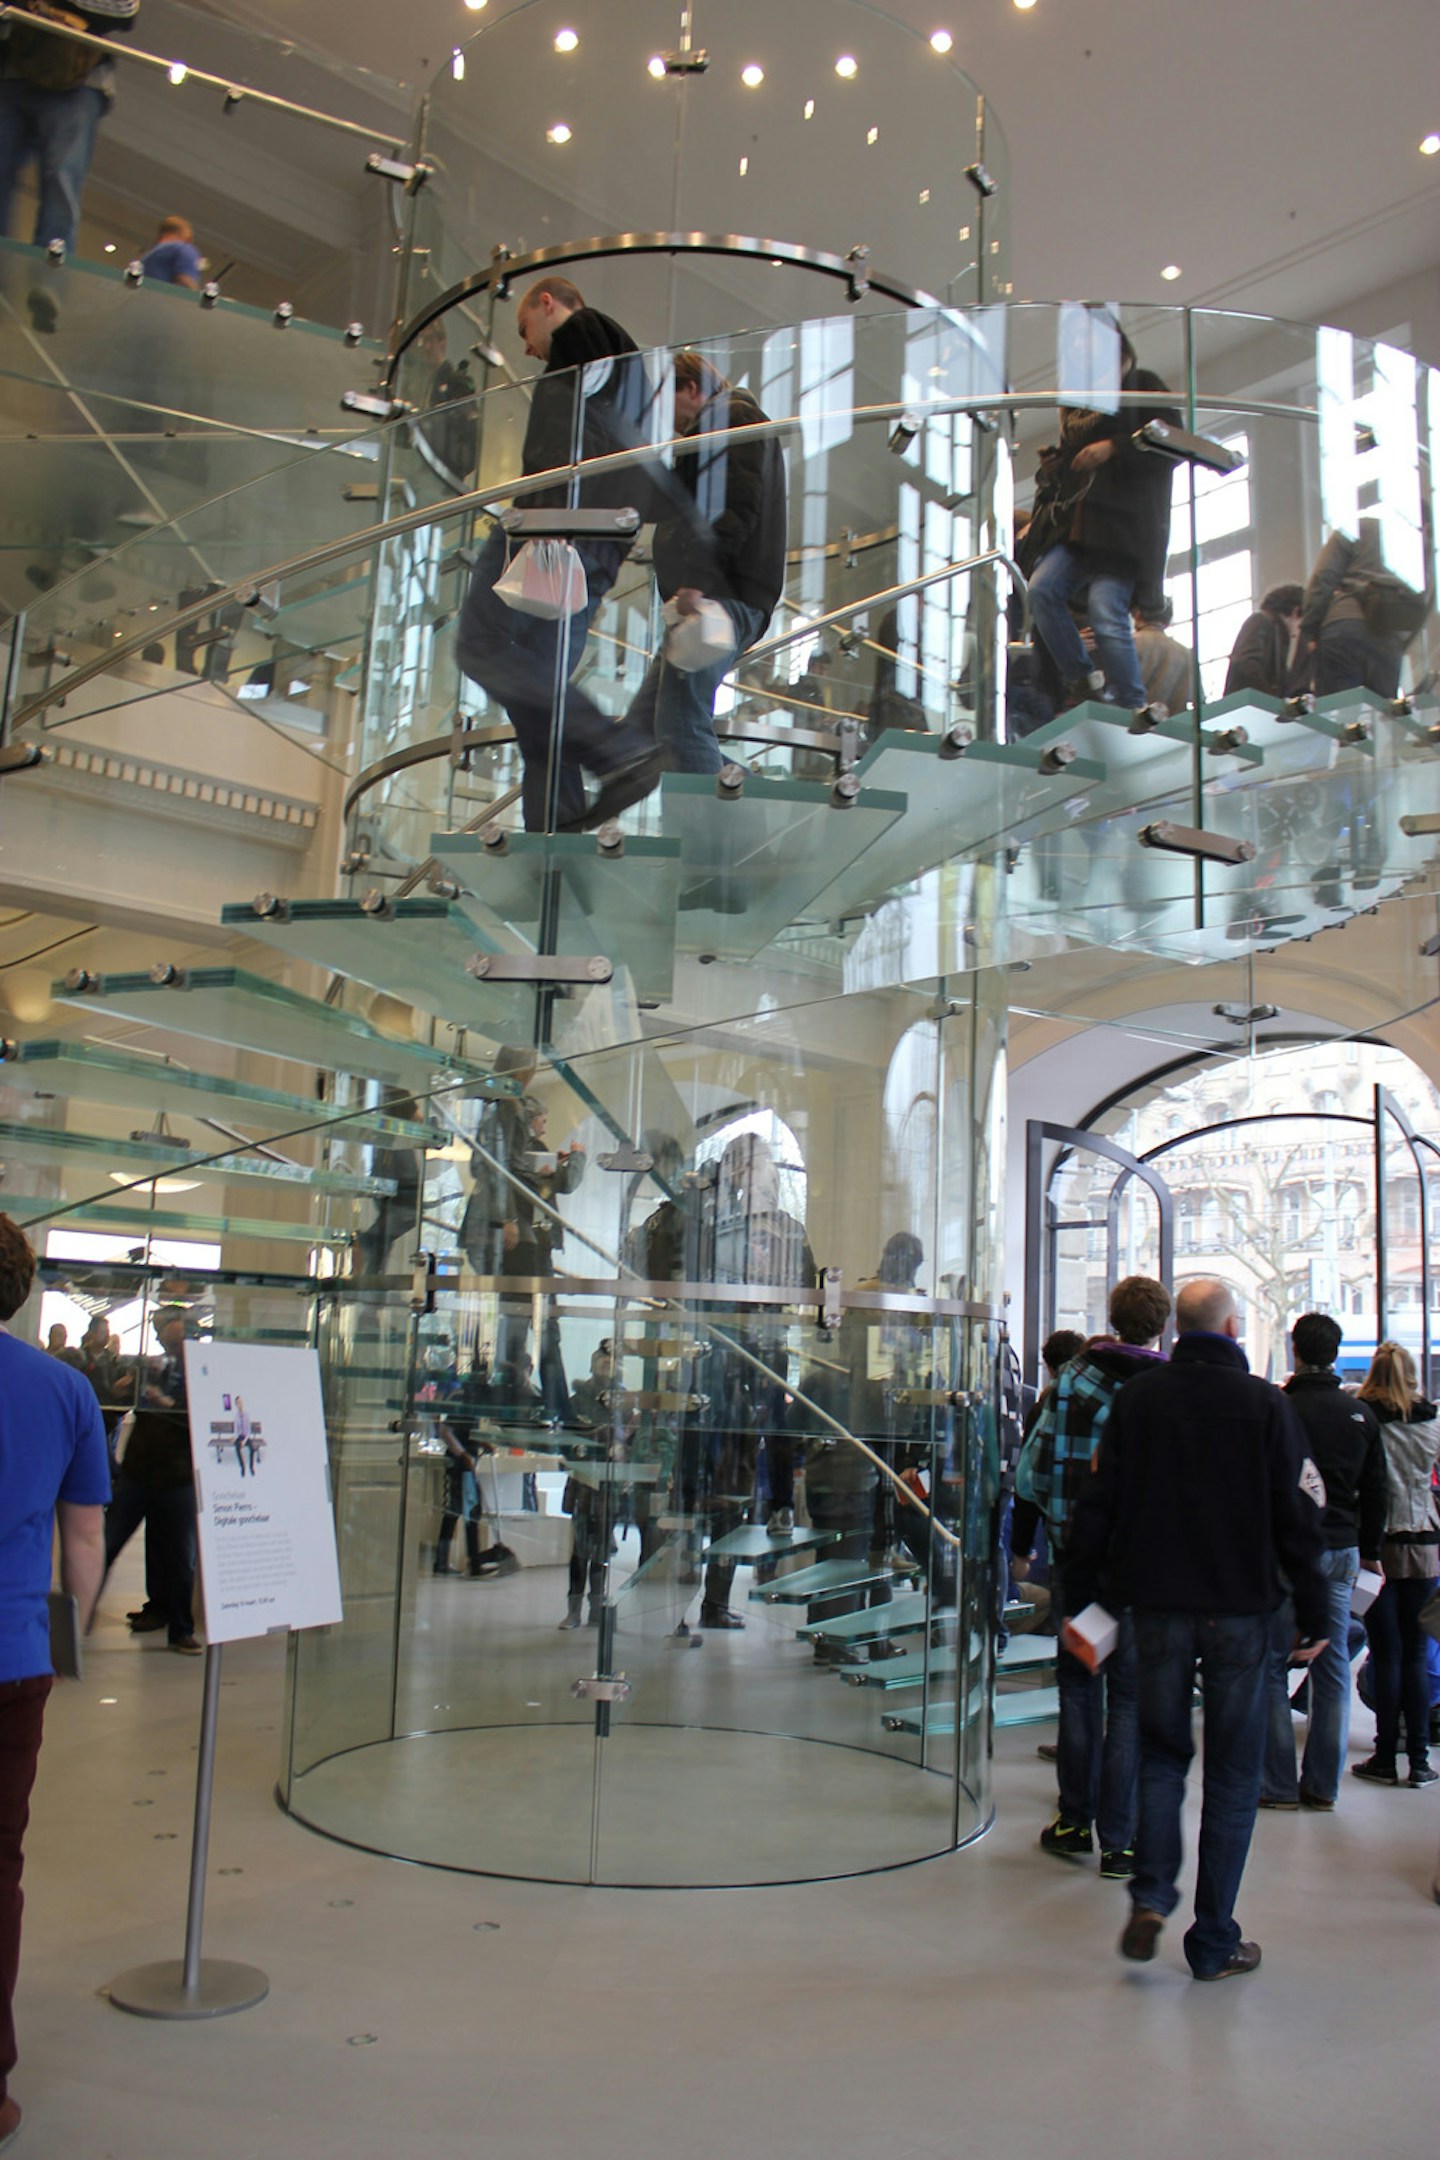 VIDEO: Inside the Apple Store Amsterdam